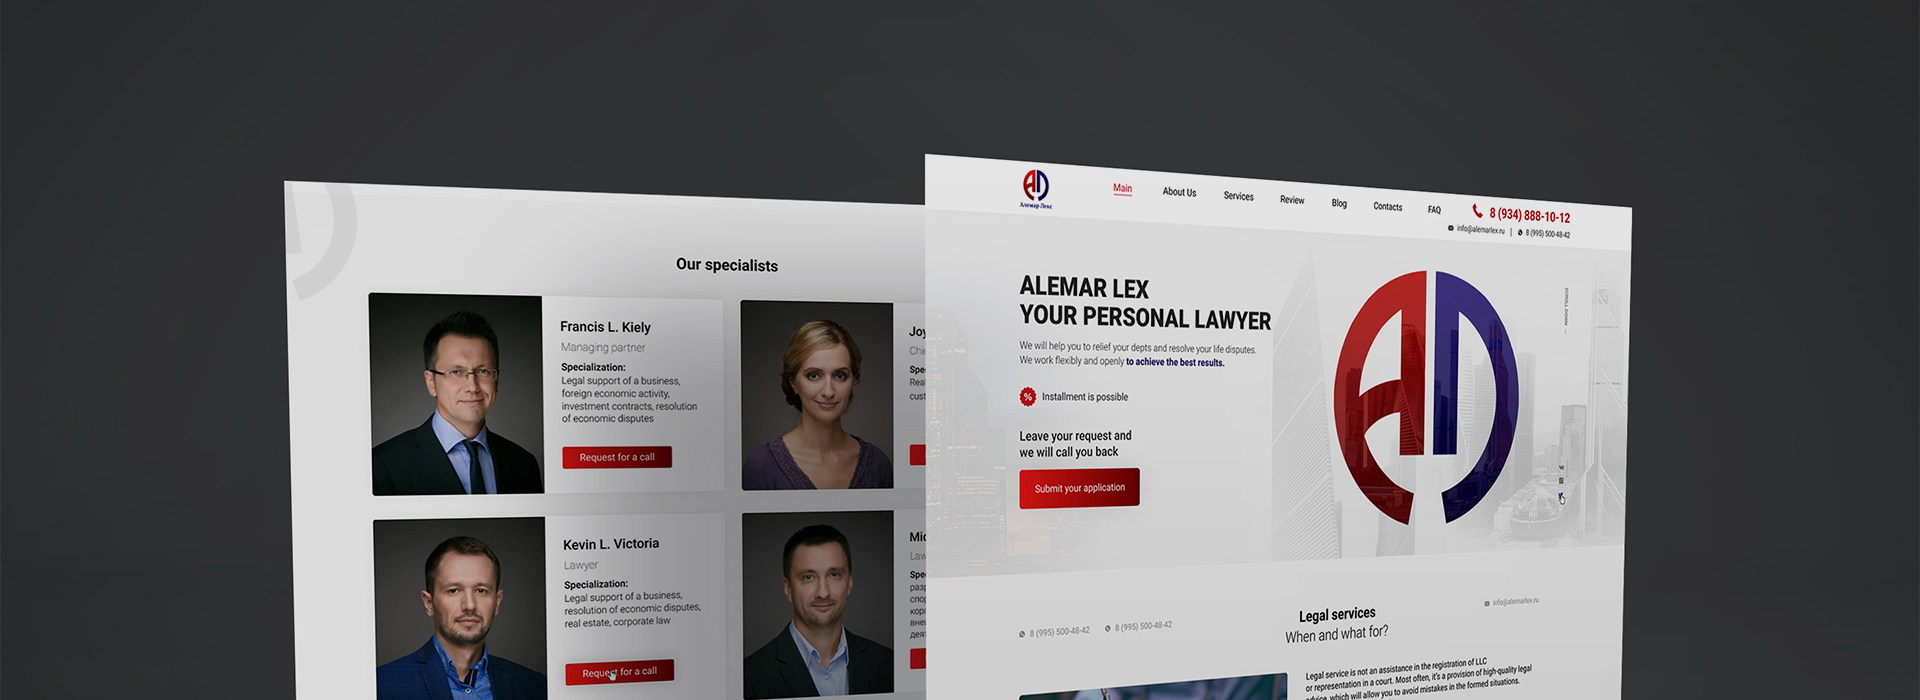 Turnkey landing page and website Alemar Lex